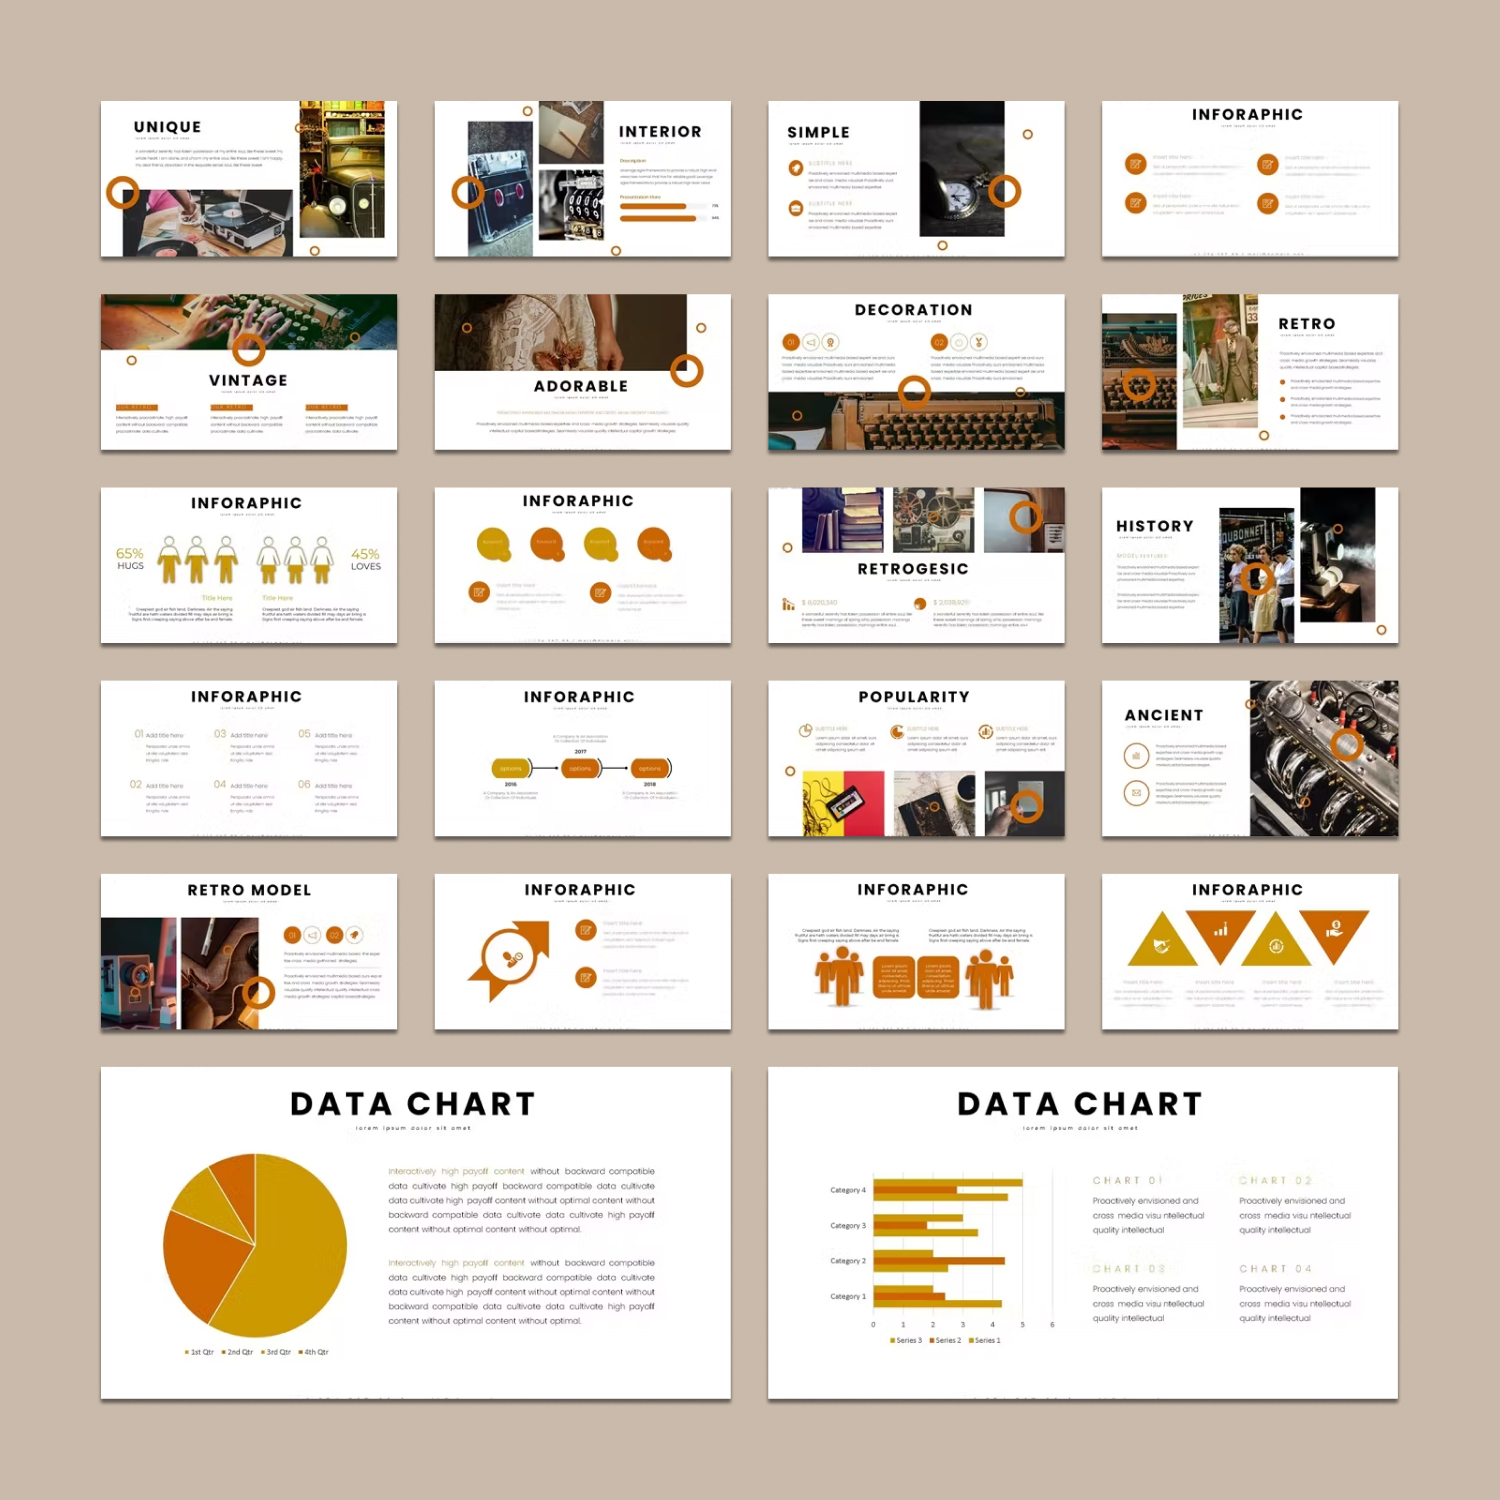 Preview vintages powerpoint template.